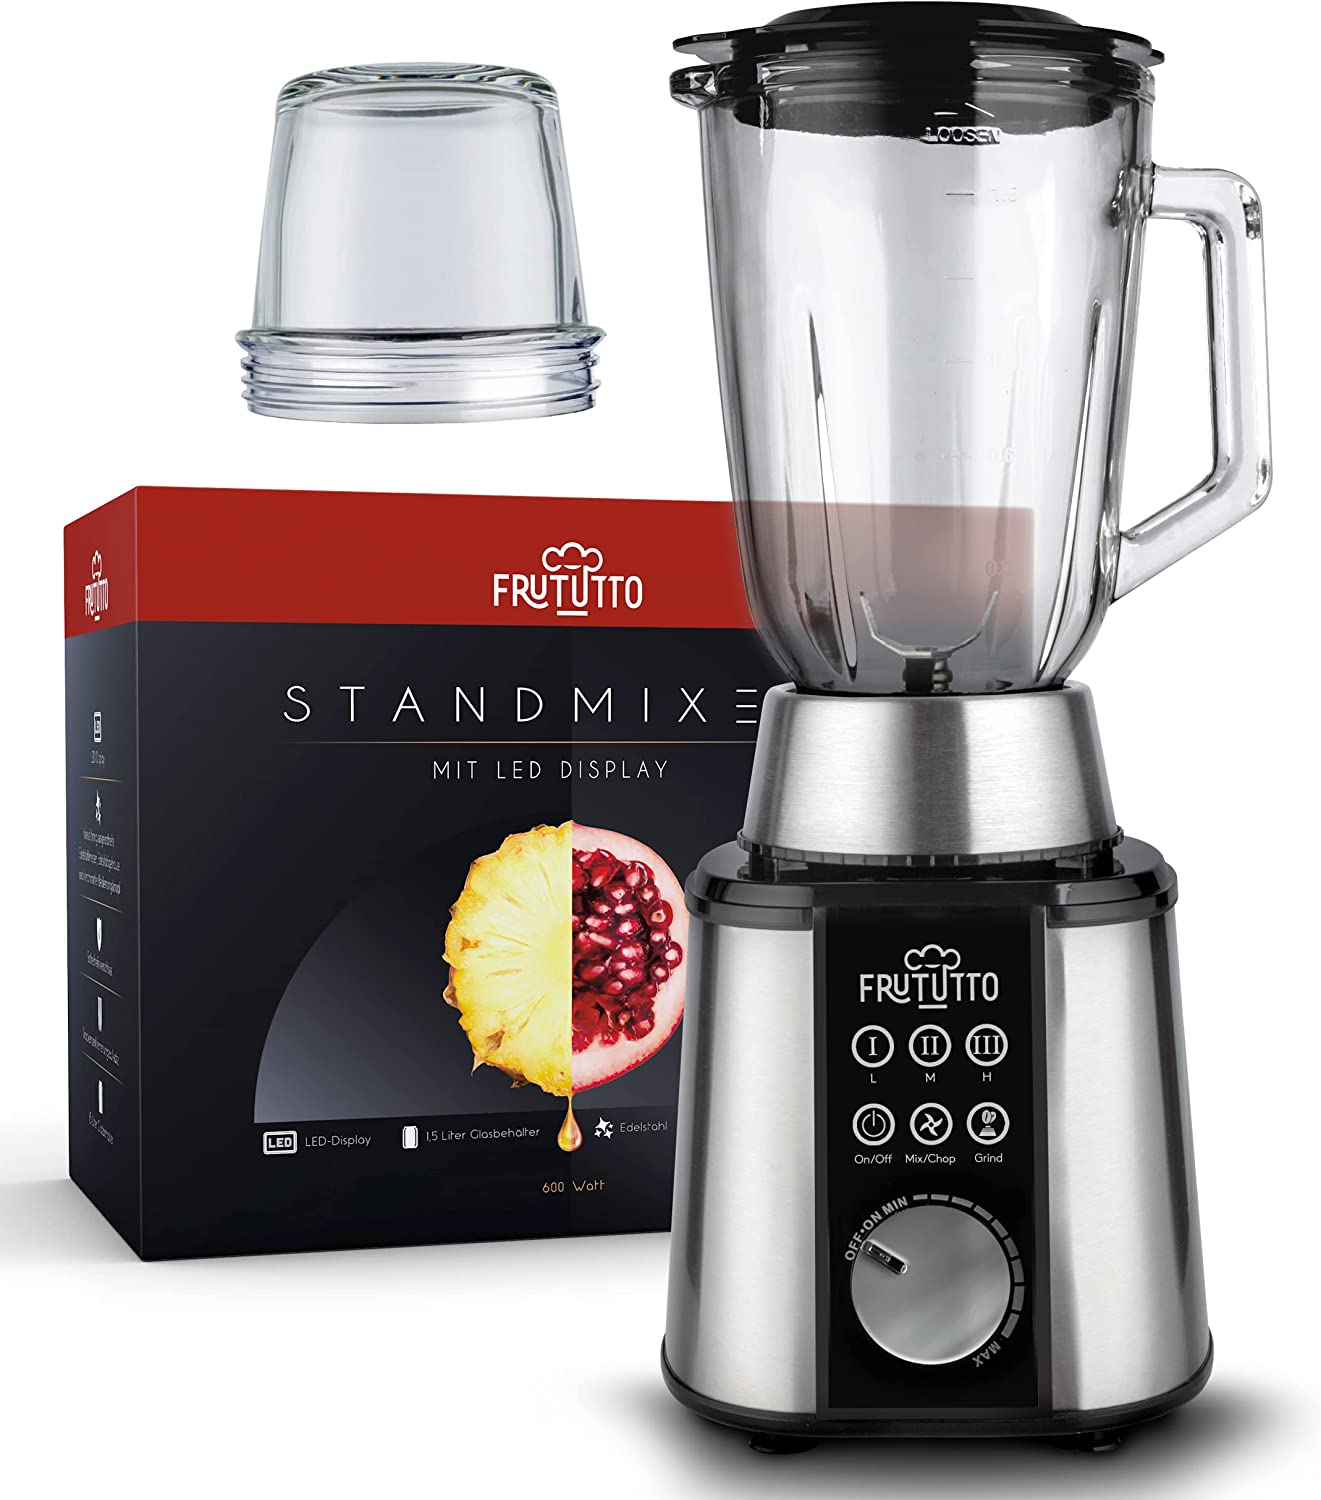 FRUTUTTO Excellent Stainless Steel 600 W Blender - Blender with 1.75 L Glass Container + 3 Speed Levels - Mixer Smoothie Maker - Juicer + Instructions (English language not guaranteed)